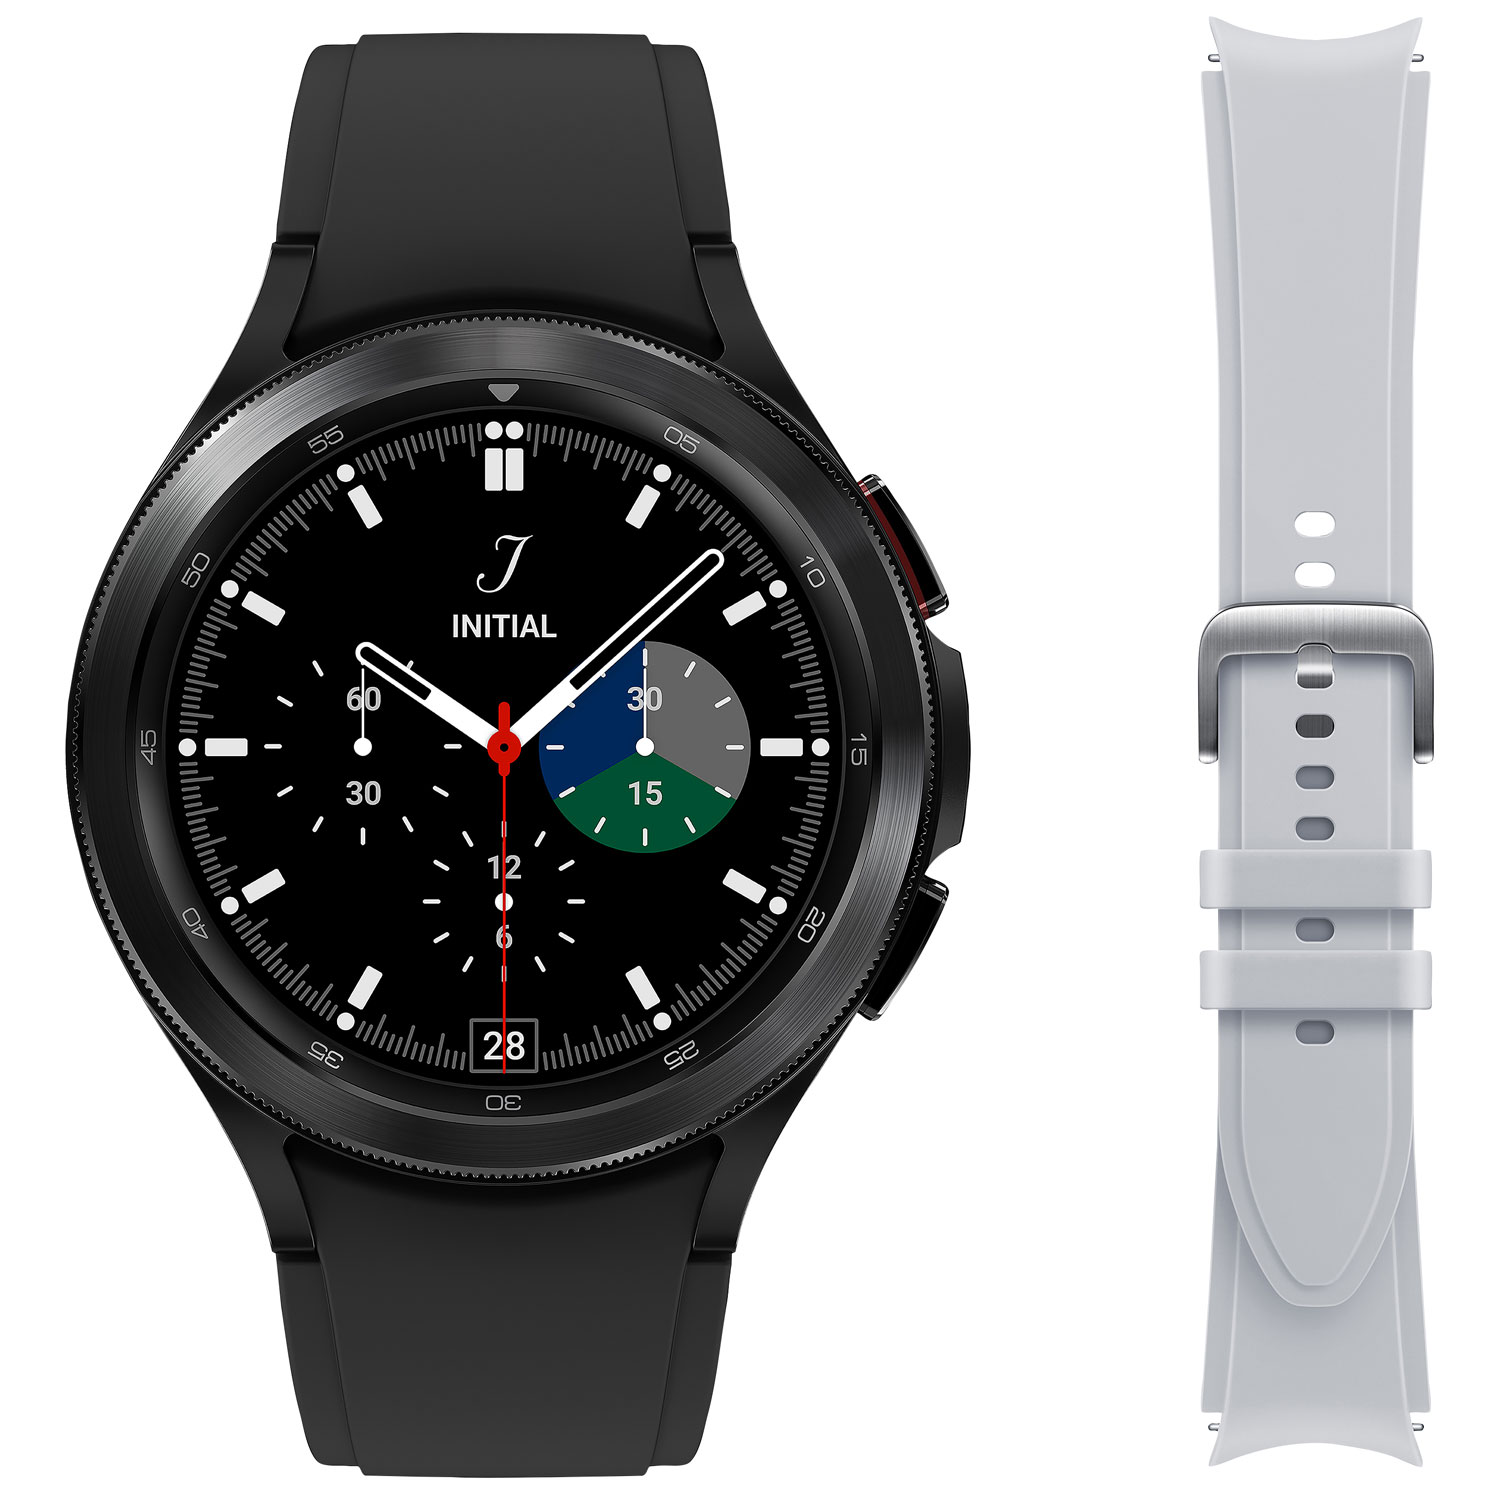 Samsung Galaxy Watch4 Classic 46mm Smartwatch w/ HR Monitor & Extra Strap -Black/Grey -Only at Best Buy